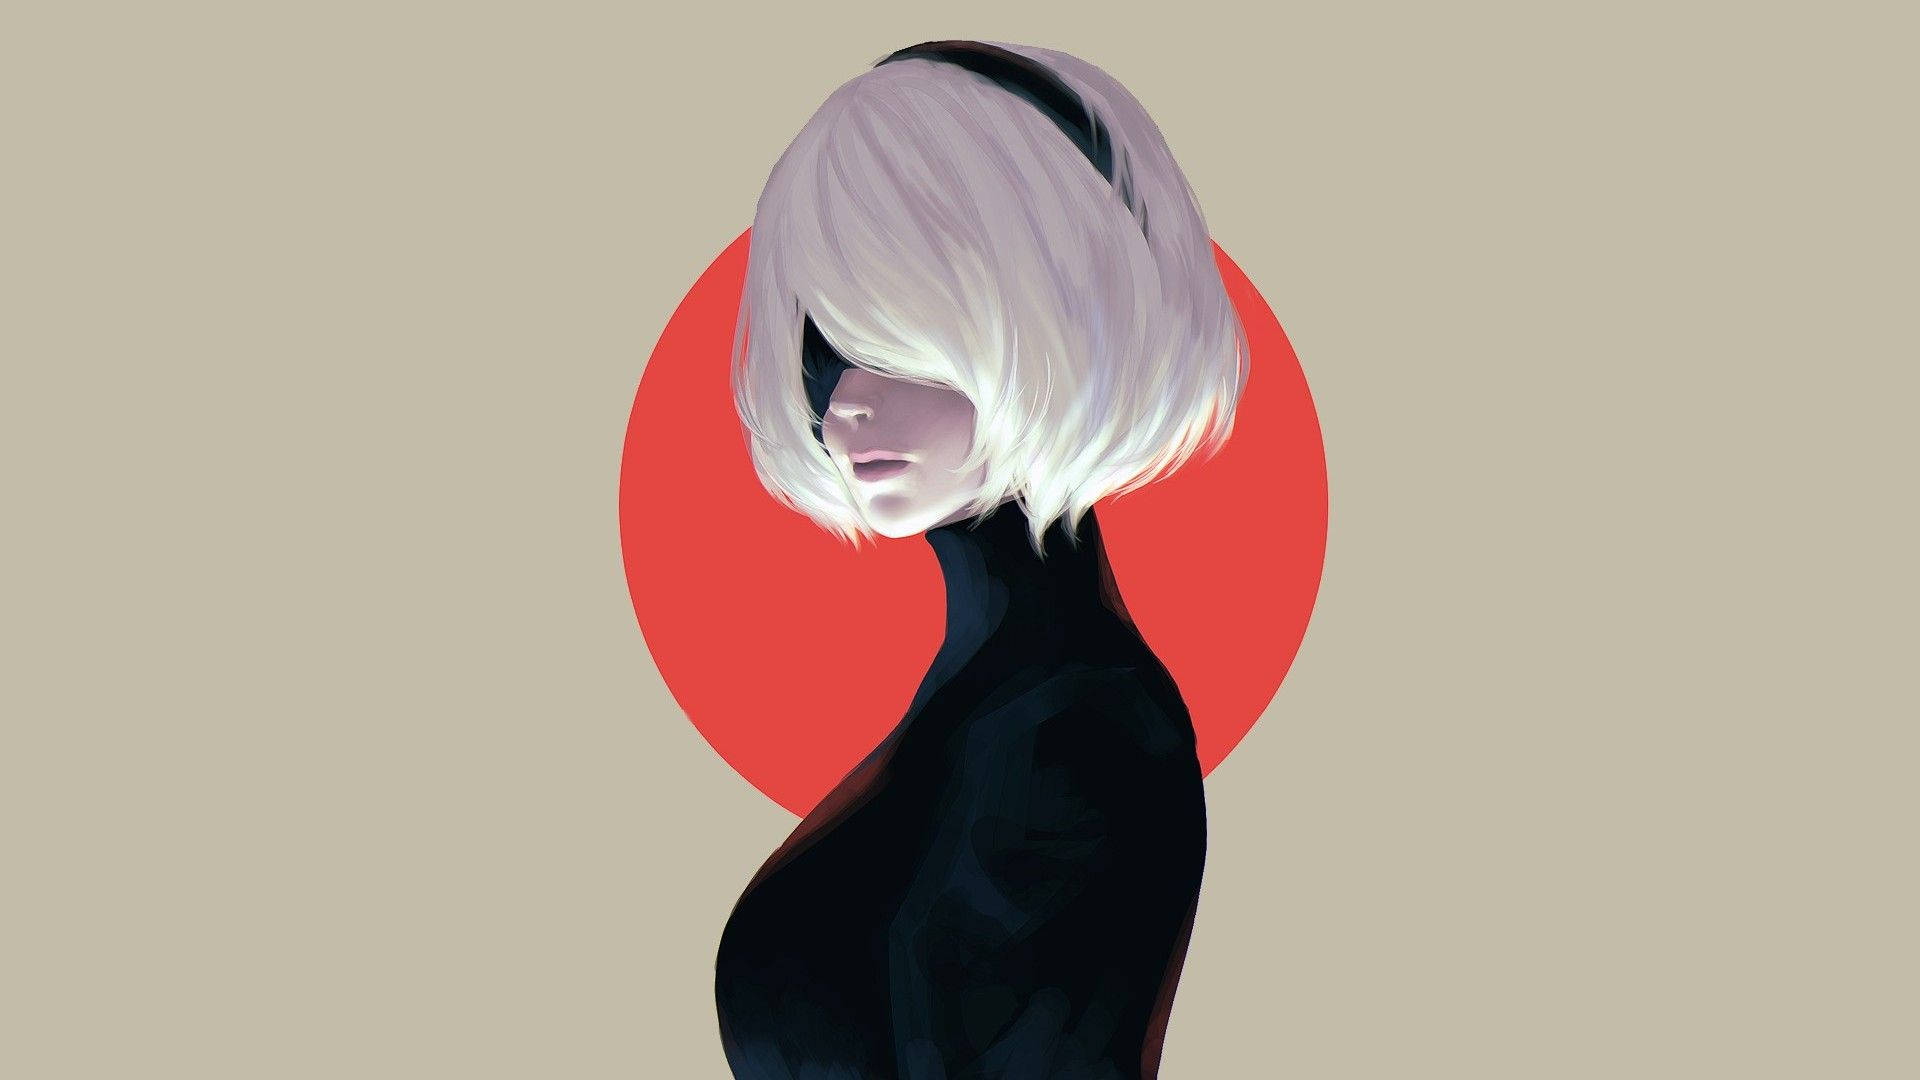 Nier Automata 2b With Black Headband And Turtle Neck Background